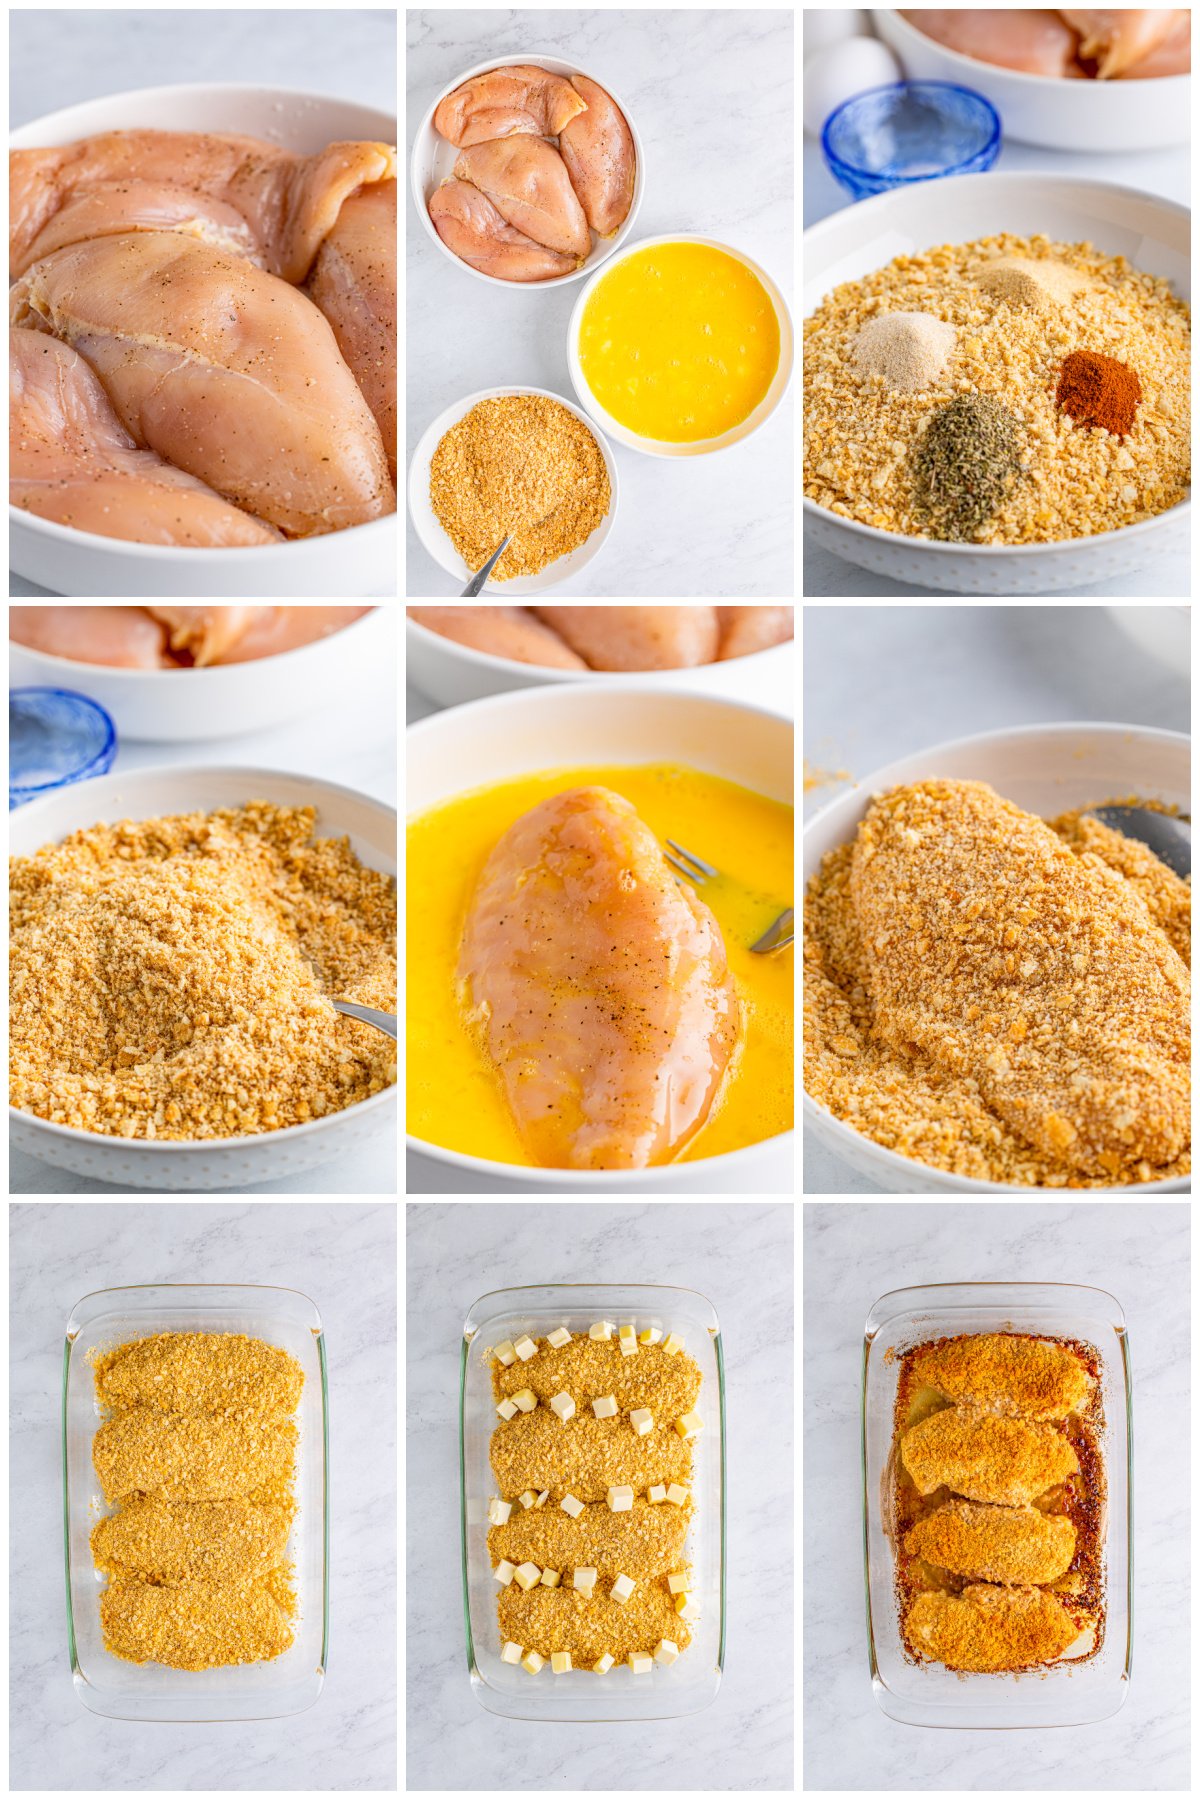 Step by step photos on how to make Ritz Cracker Chicken.